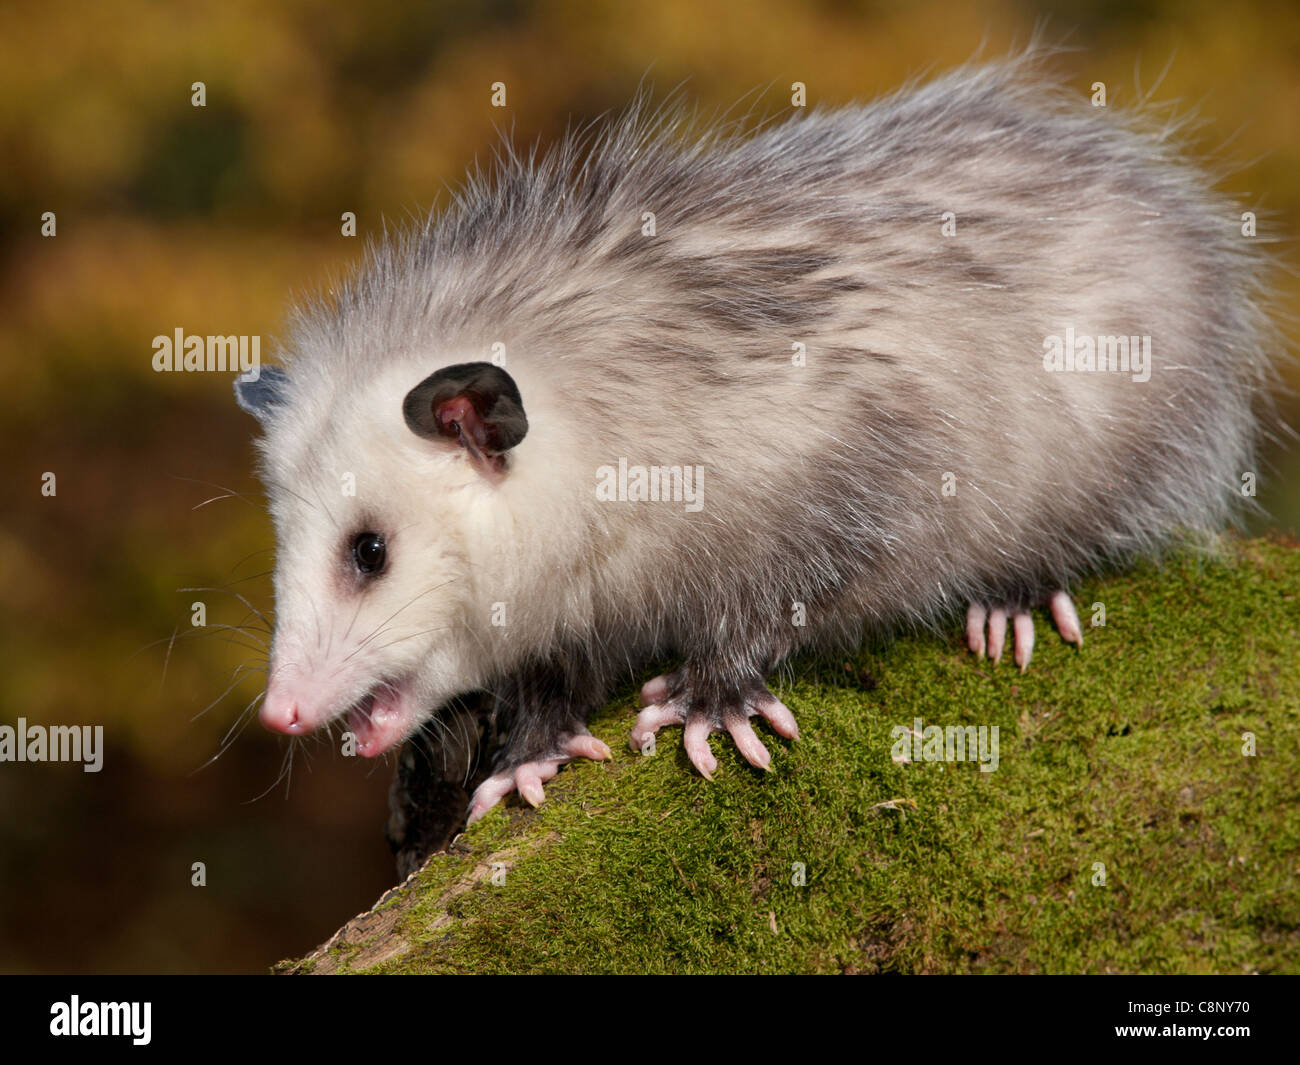 https://c8.alamy.com/comp/C8NY70/8-month-old-opossum-is-on-a-moss-covered-log-he-is-at-a-wildlife-rehab-C8NY70.jpg